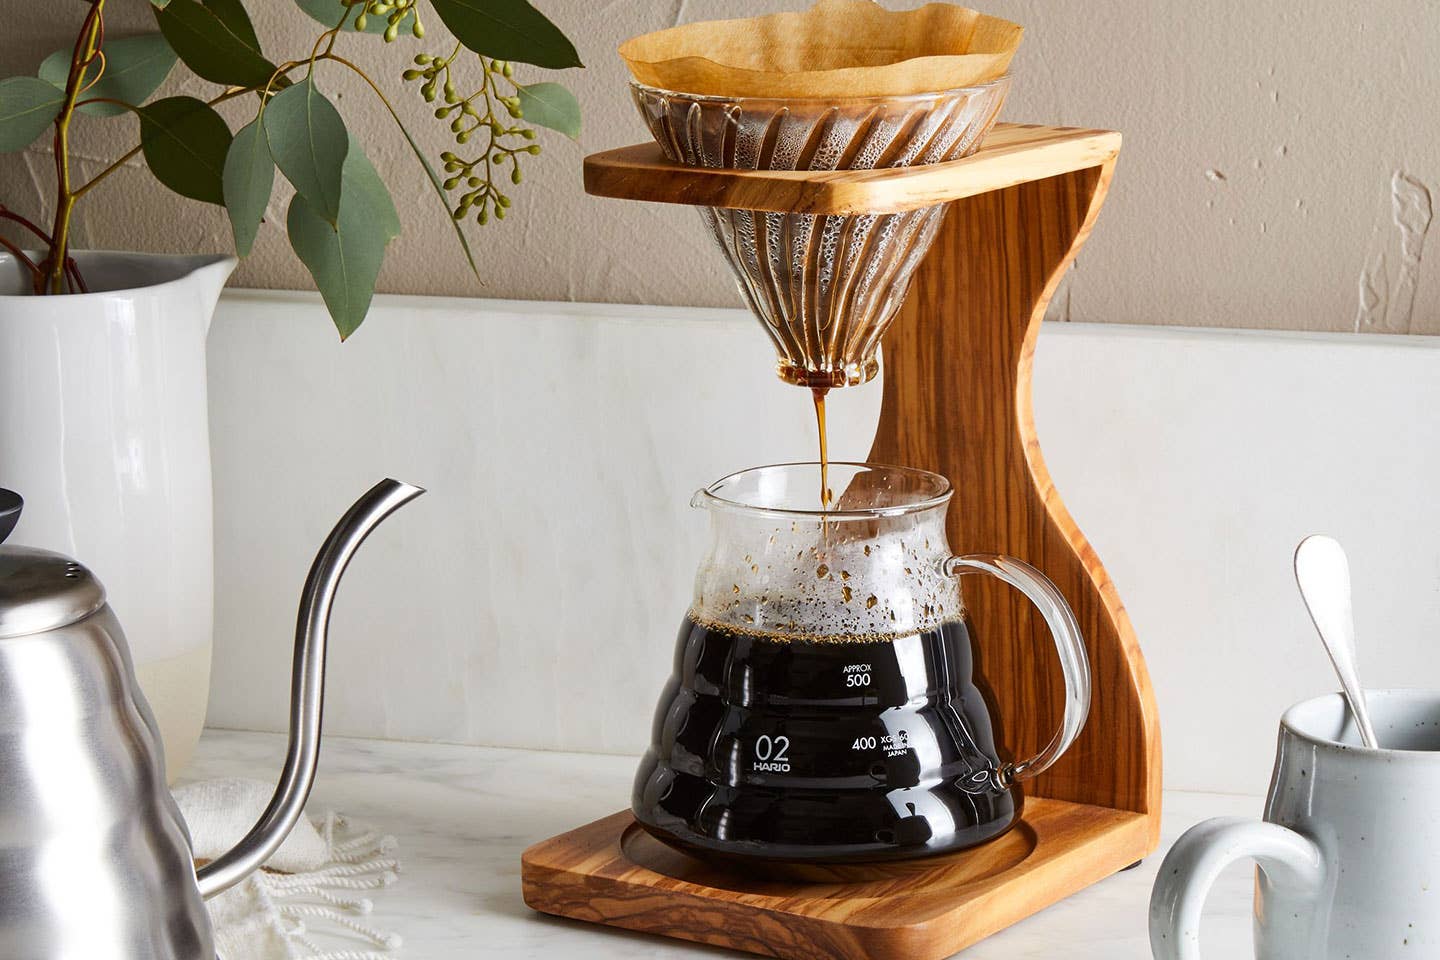 How to Make Pour Over Coffee Chemex: A Comprehensive Guide